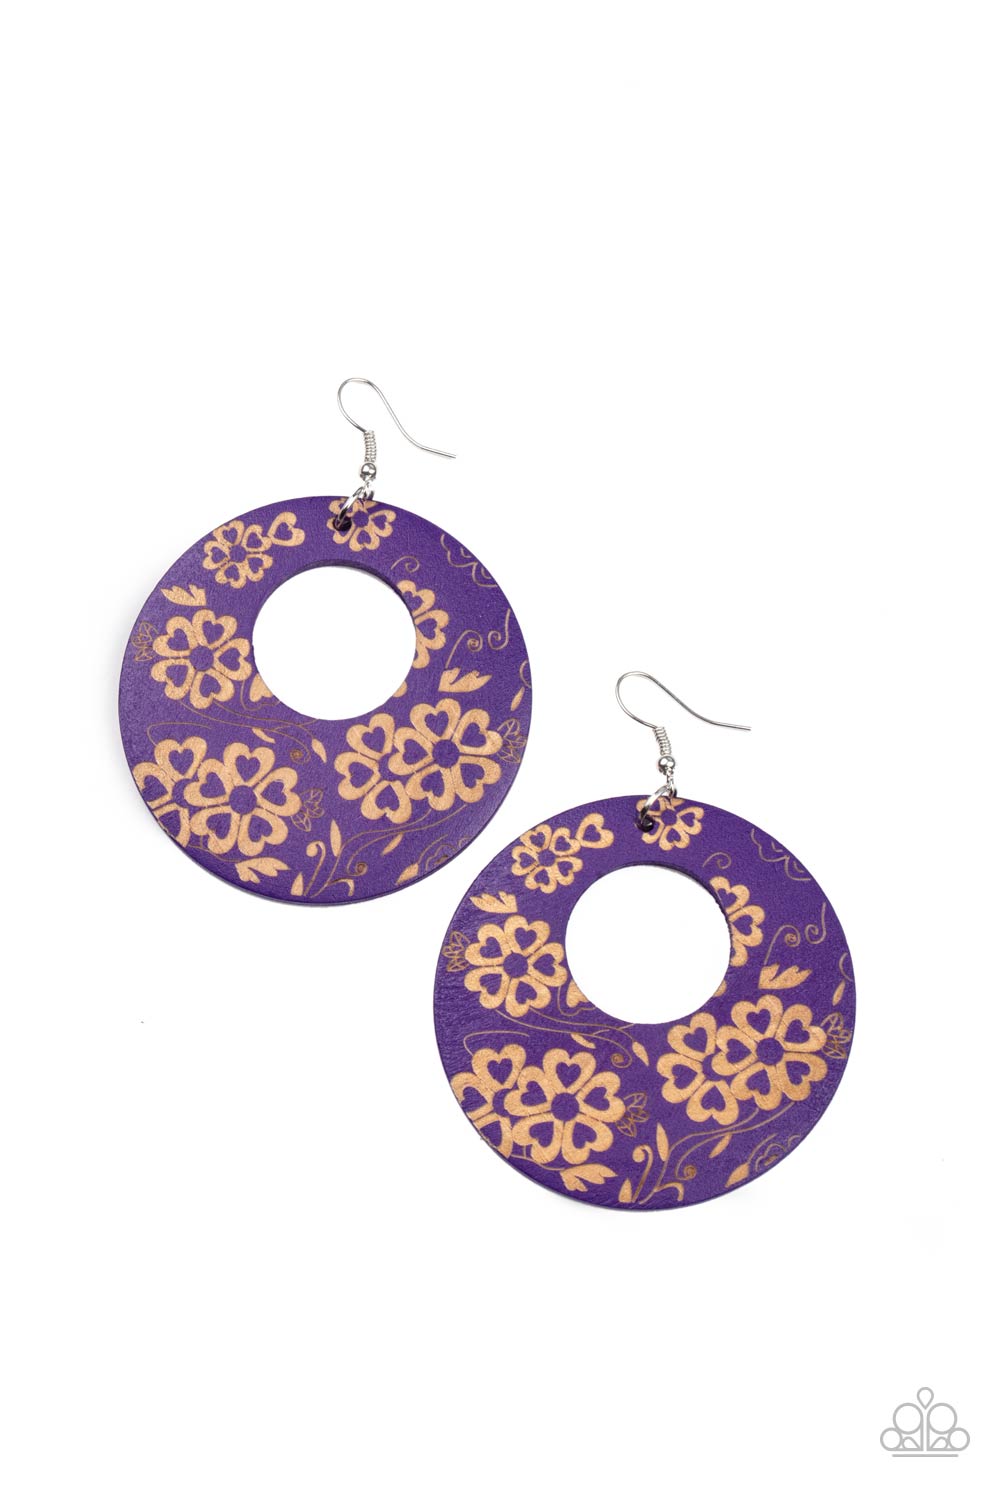 Galapagos Garden Party Purple Floral Wood Earrings - Paparazzi Accessories- lightbox - CarasShop.com - $5 Jewelry by Cara Jewels